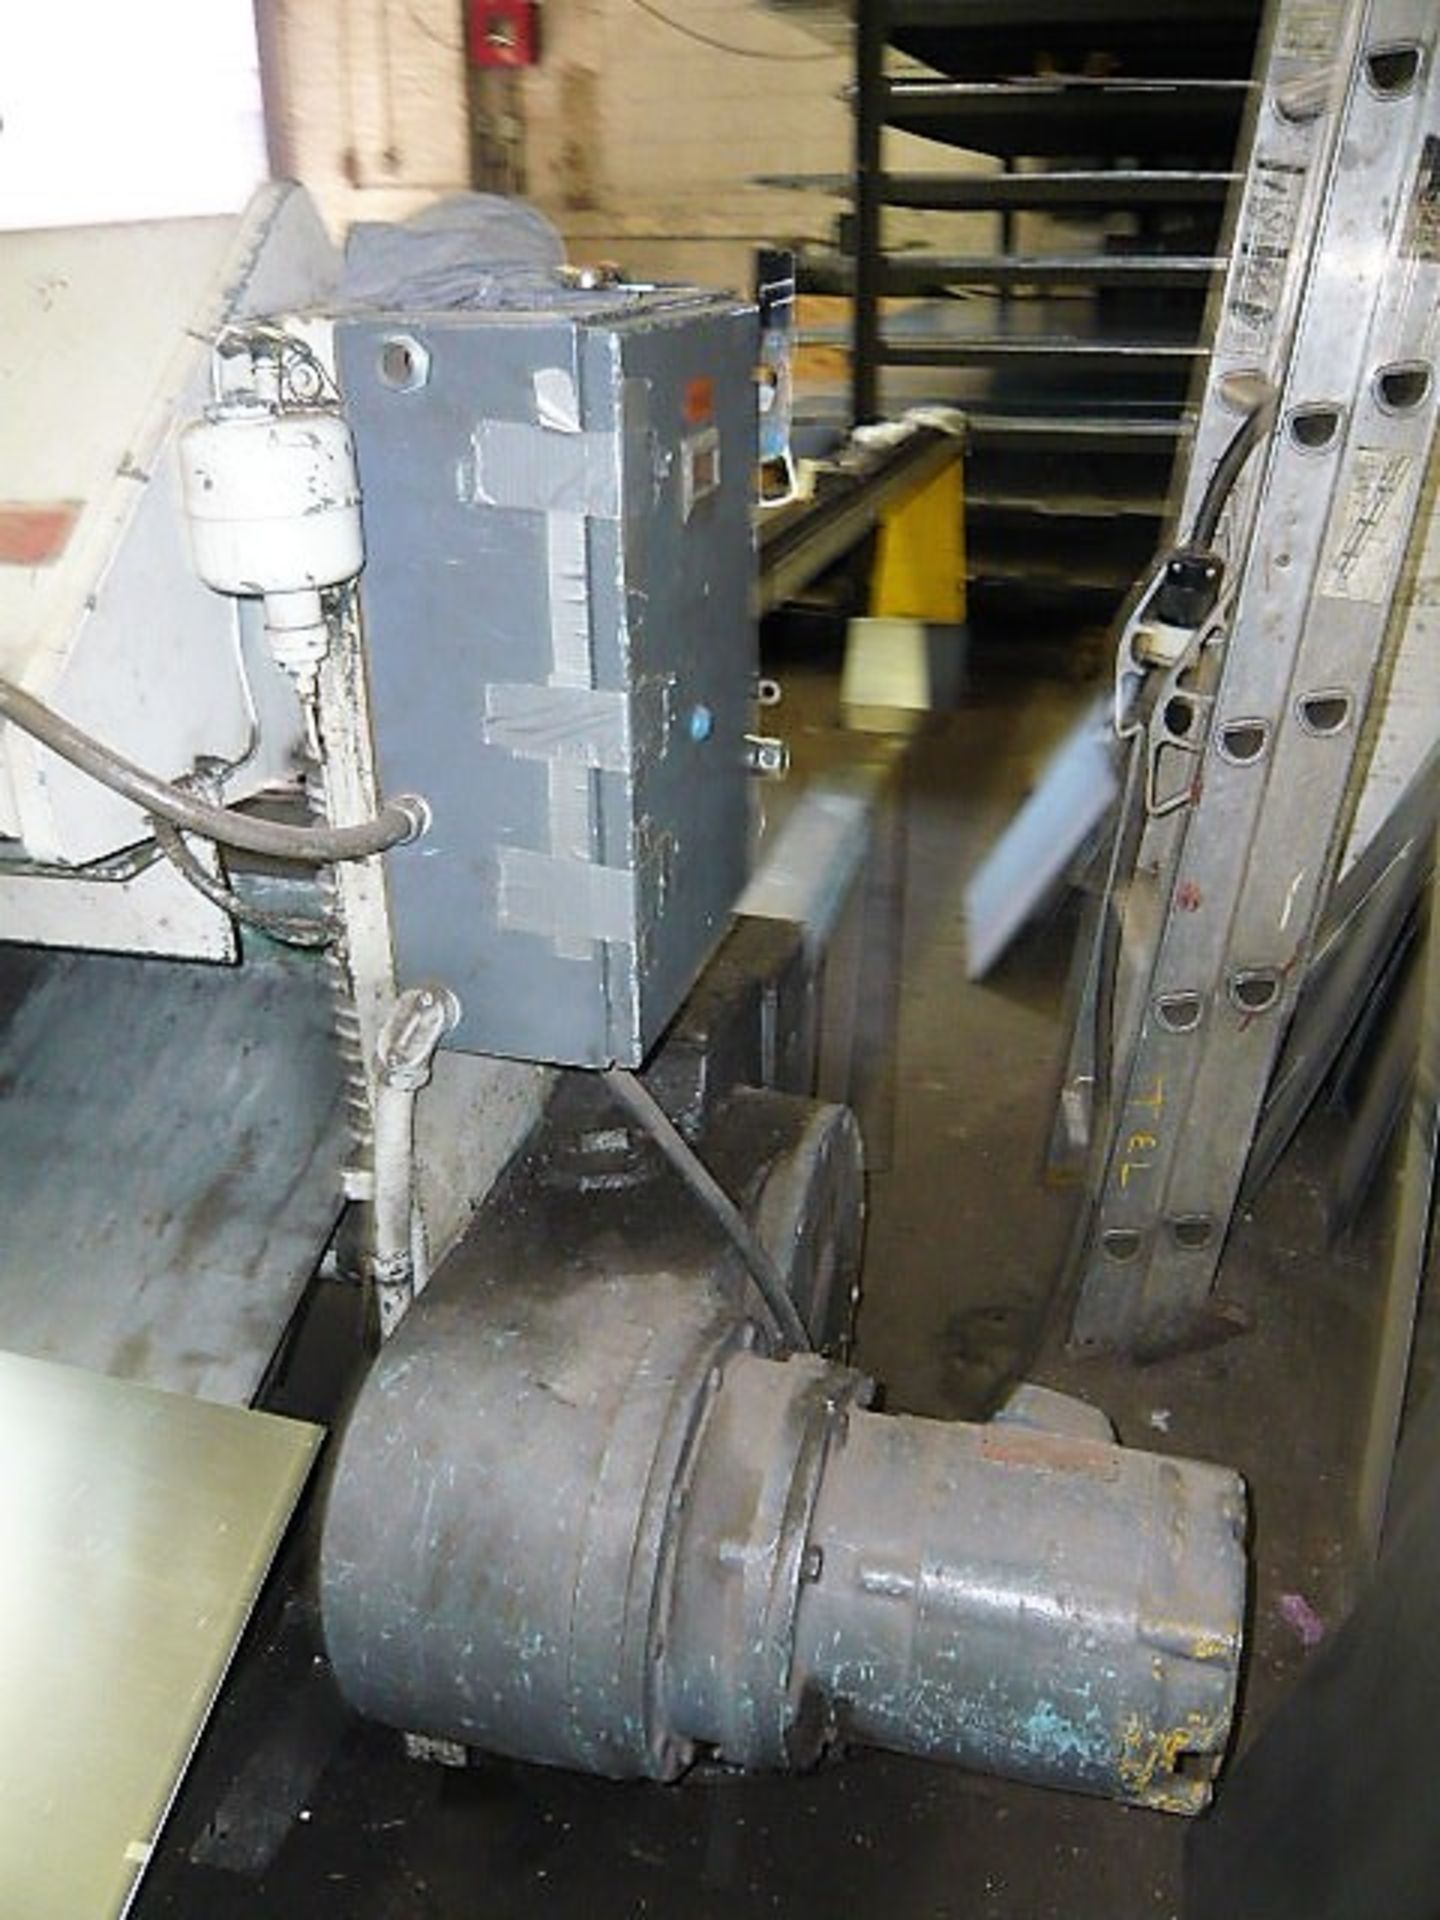 10ga X 10' NIAGARA MDL. 1R-10-10 MECHANICAL POWER SHEAR, WITH SQUARING ARM, FRONT OPERATED POWER - Image 5 of 8